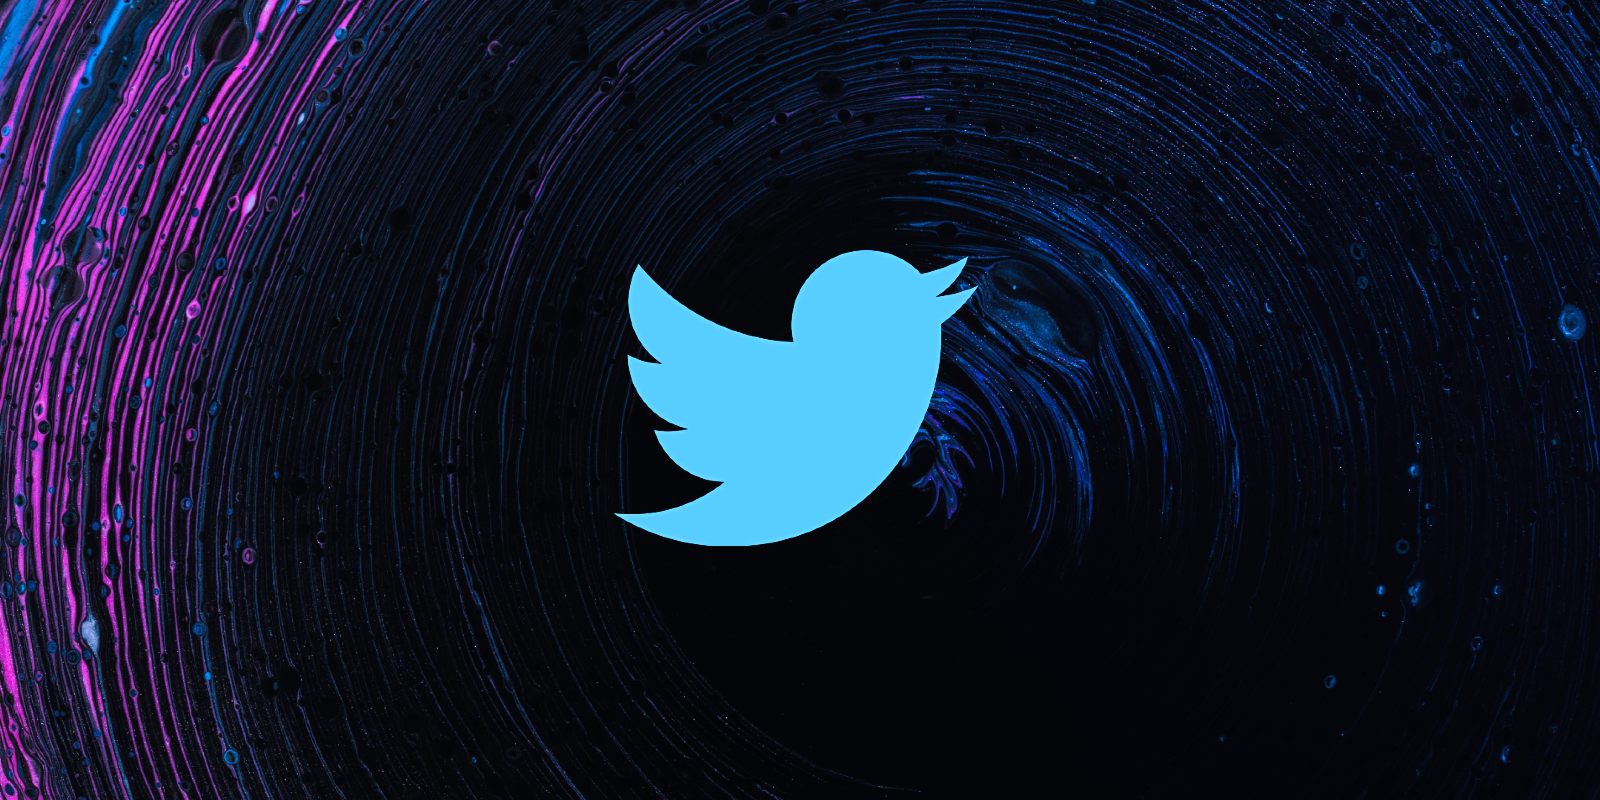 Twitter rolls out the new account verification process